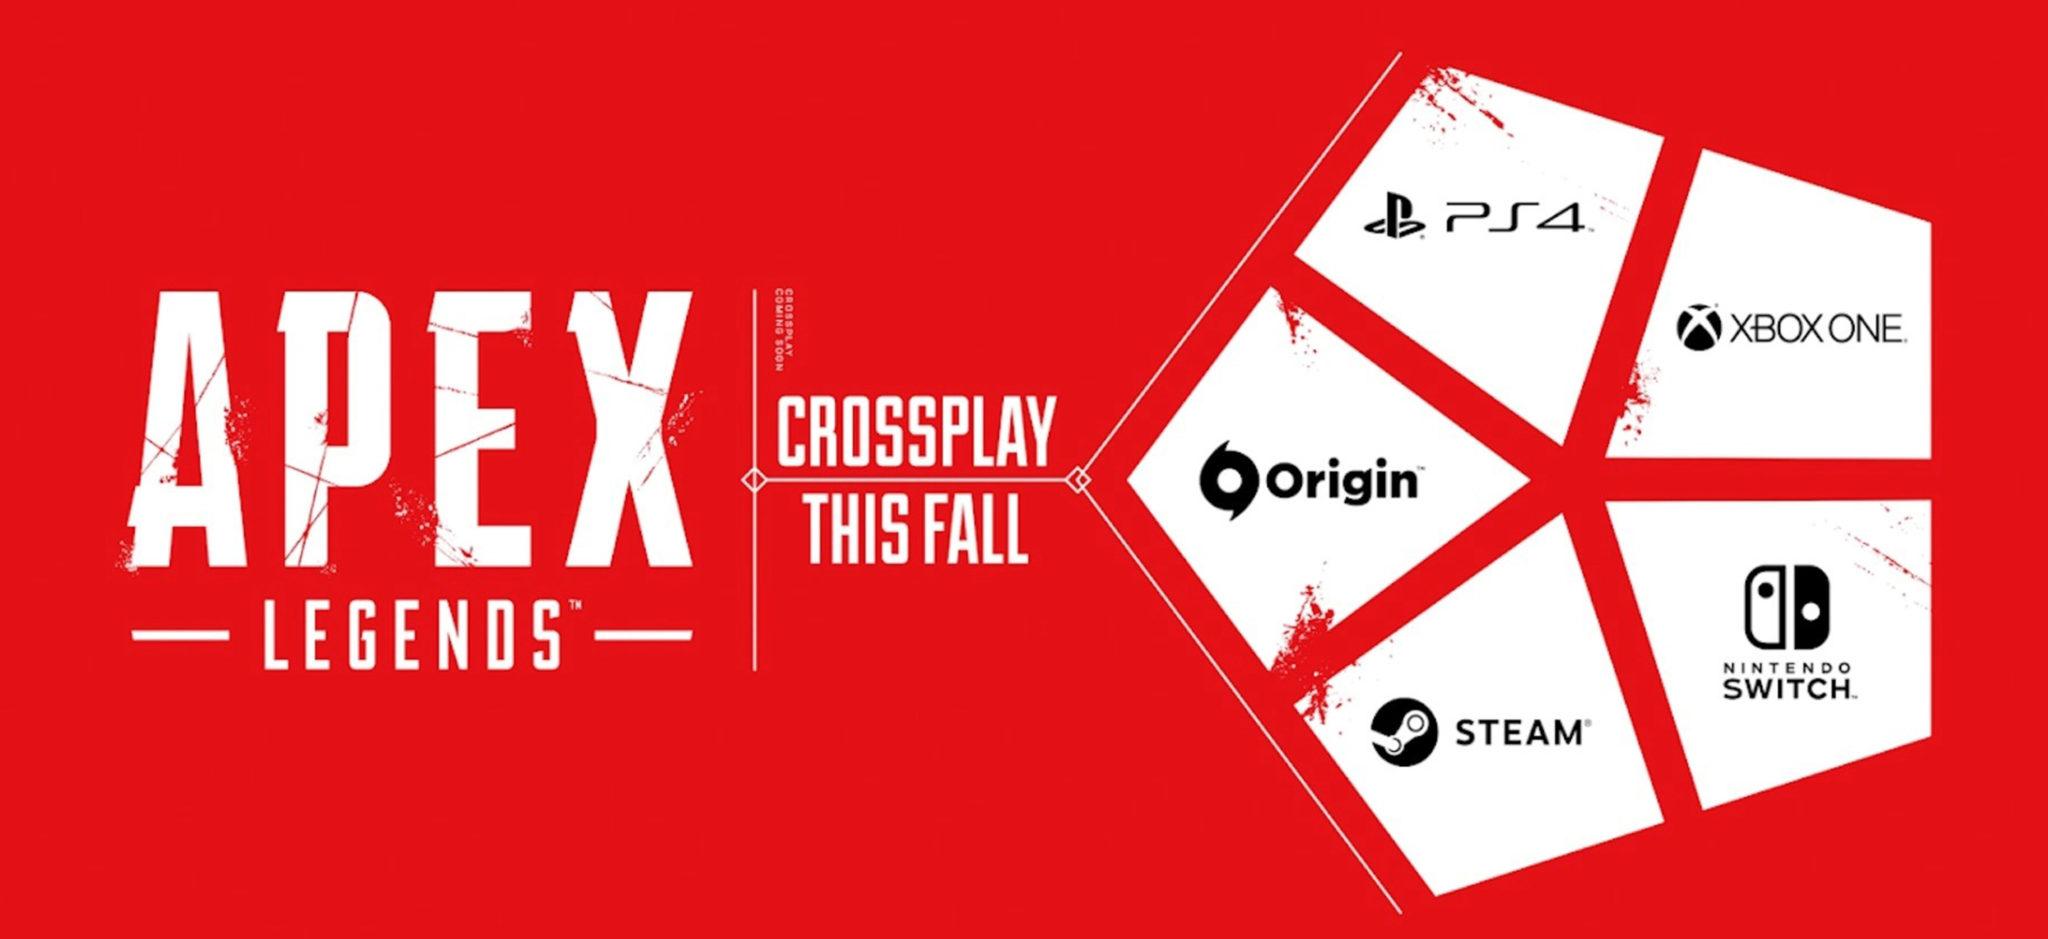 Apex Legends crossplay with all platforms listed